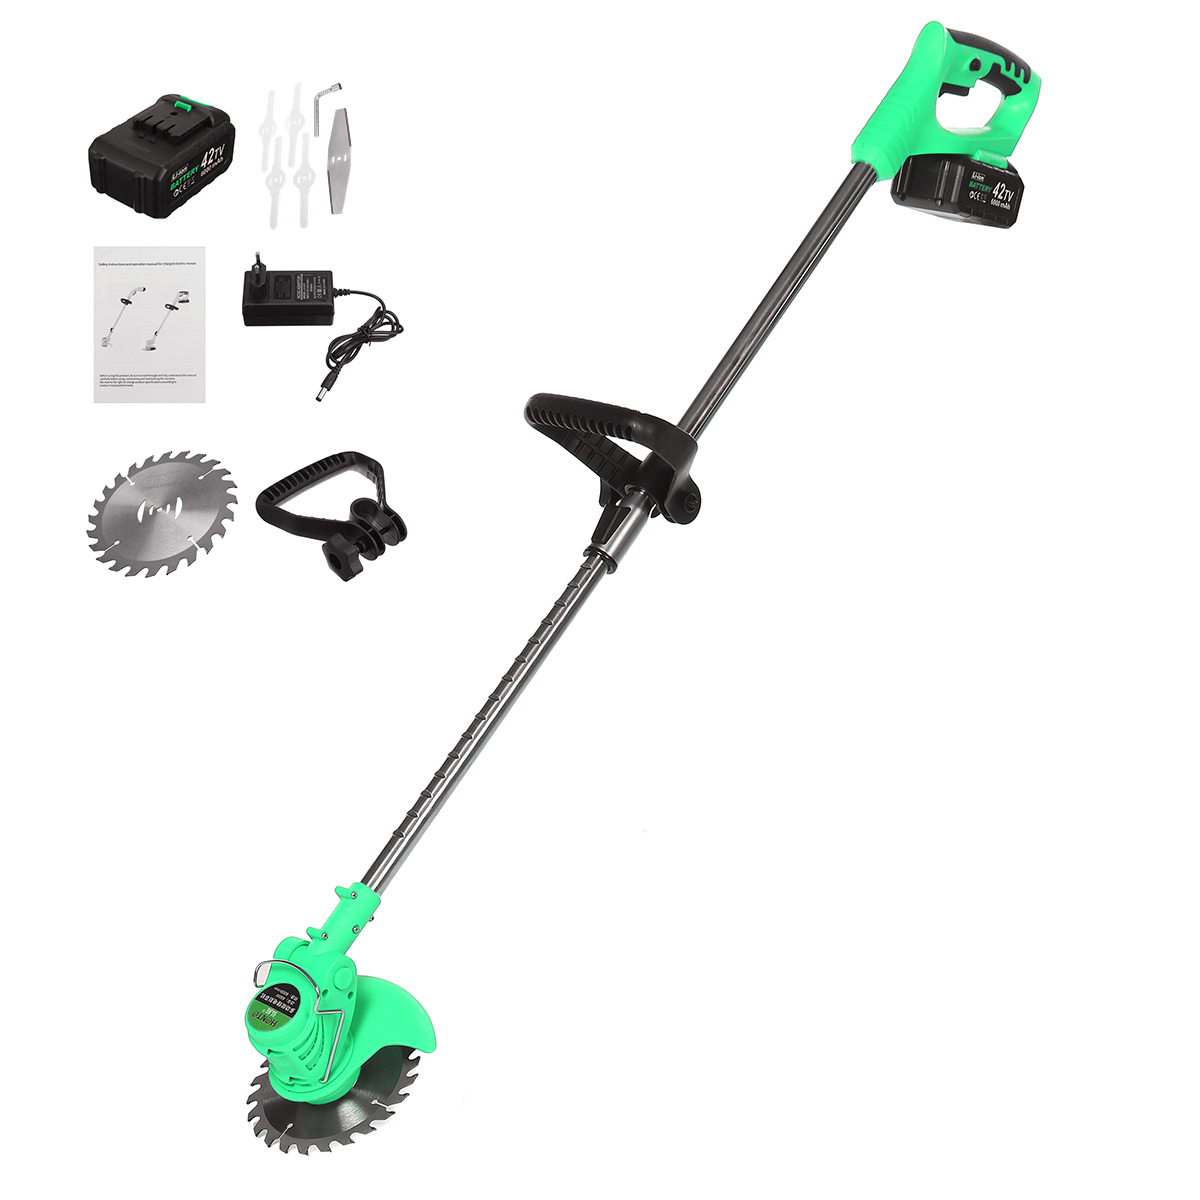 110V/220V Rechargeable Wireless Electric Grass Trimmer Kit Garden Lawnmower With Battery